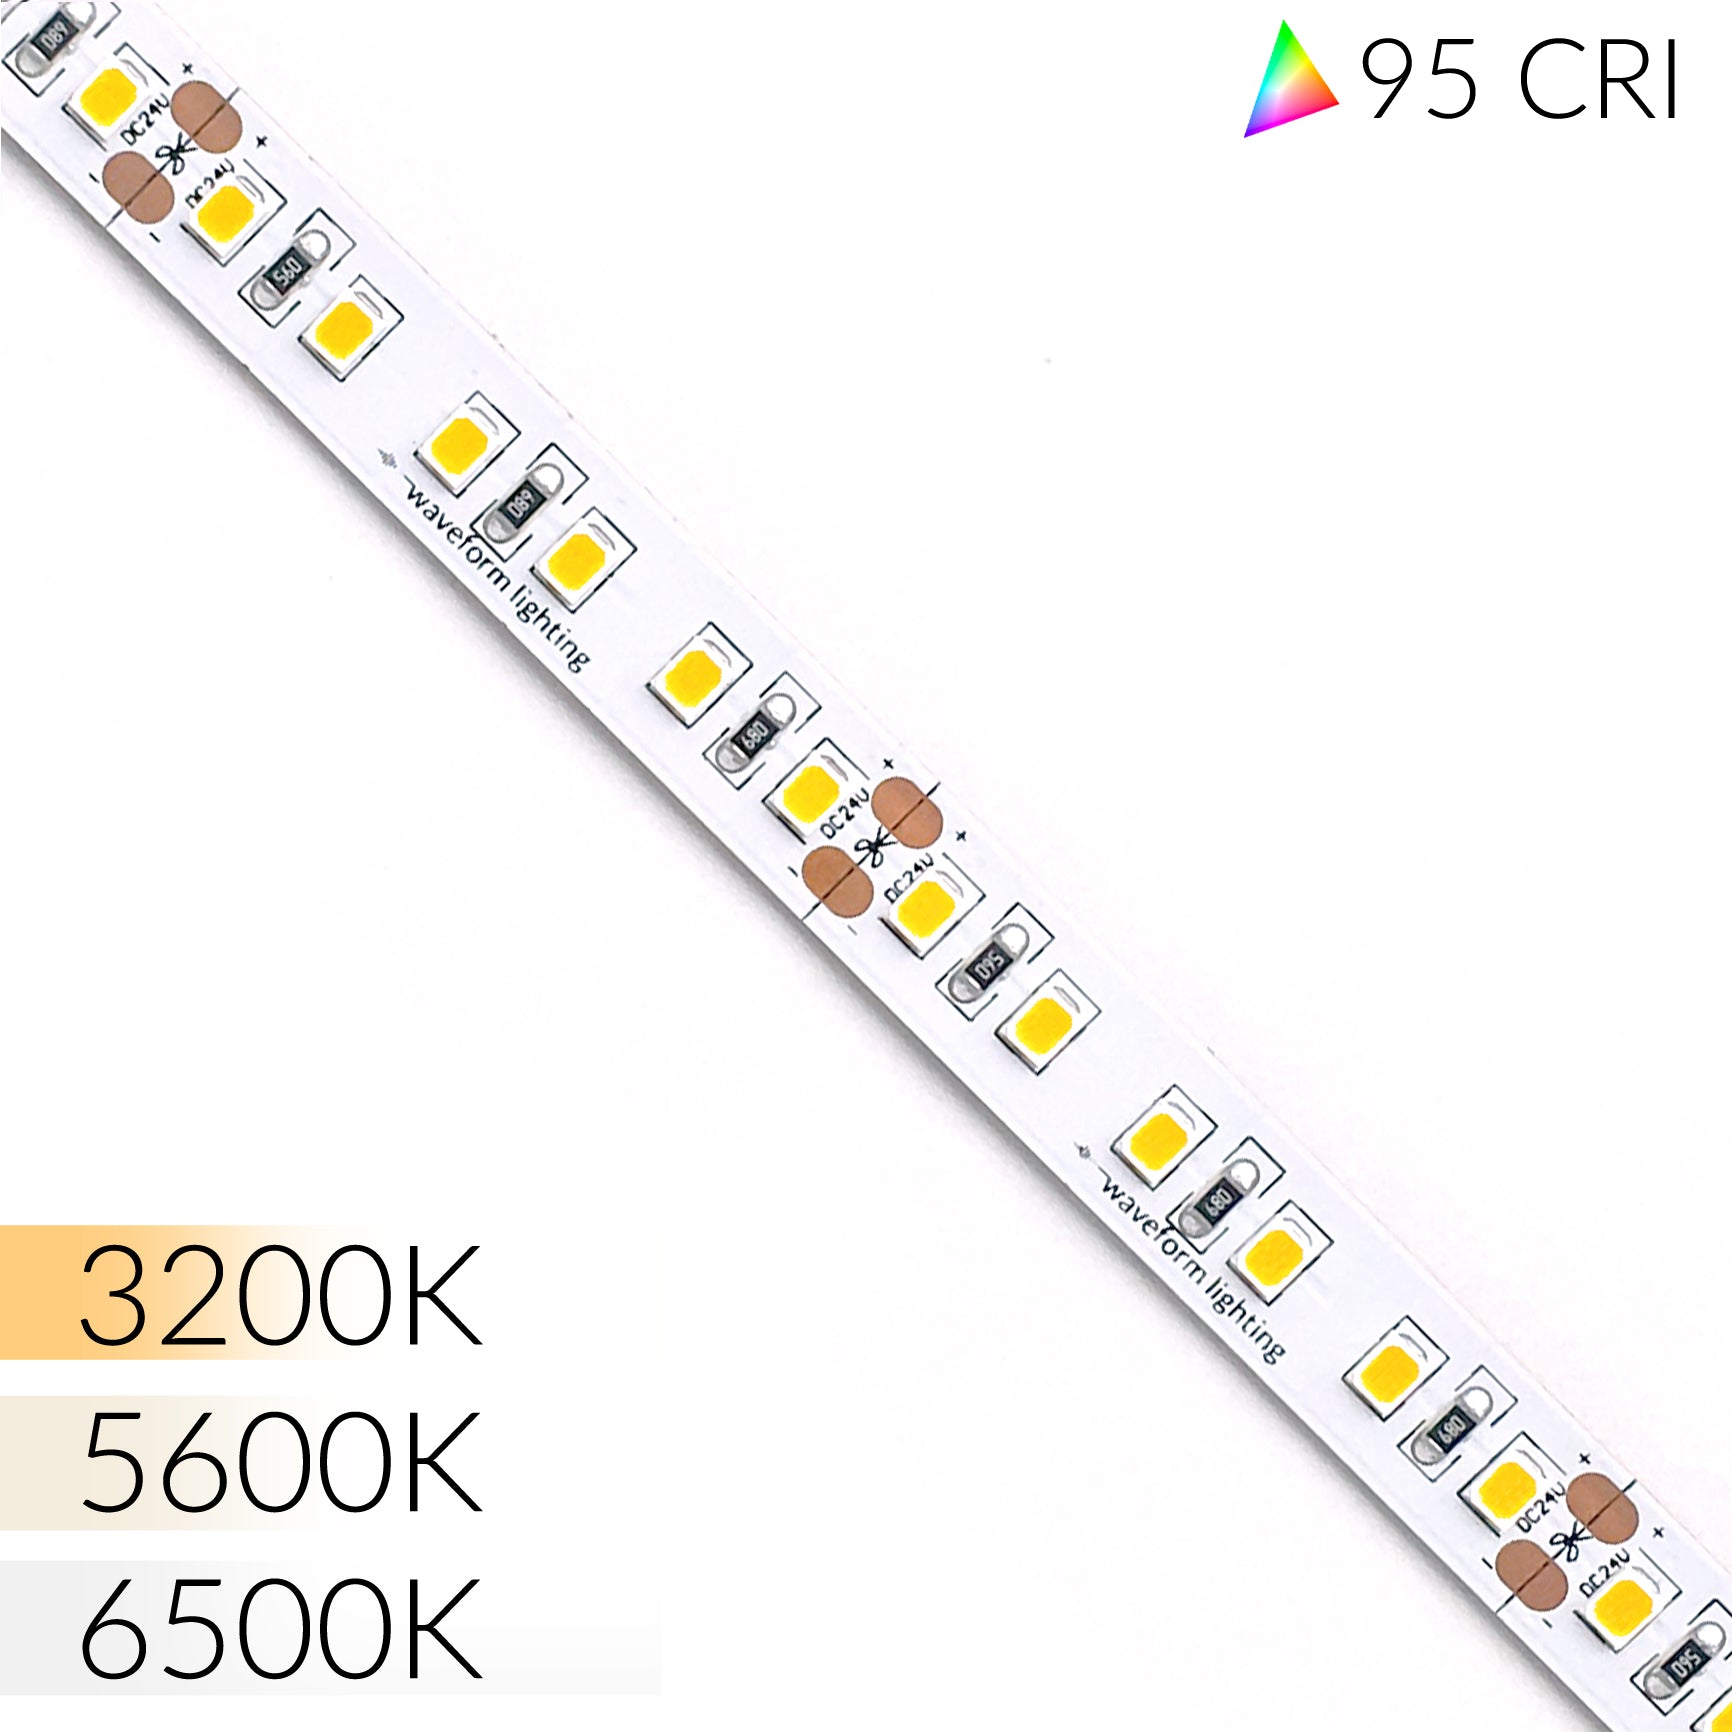 0.4 Inch Small LED Strip Light Corner Channel For 4mm Tape